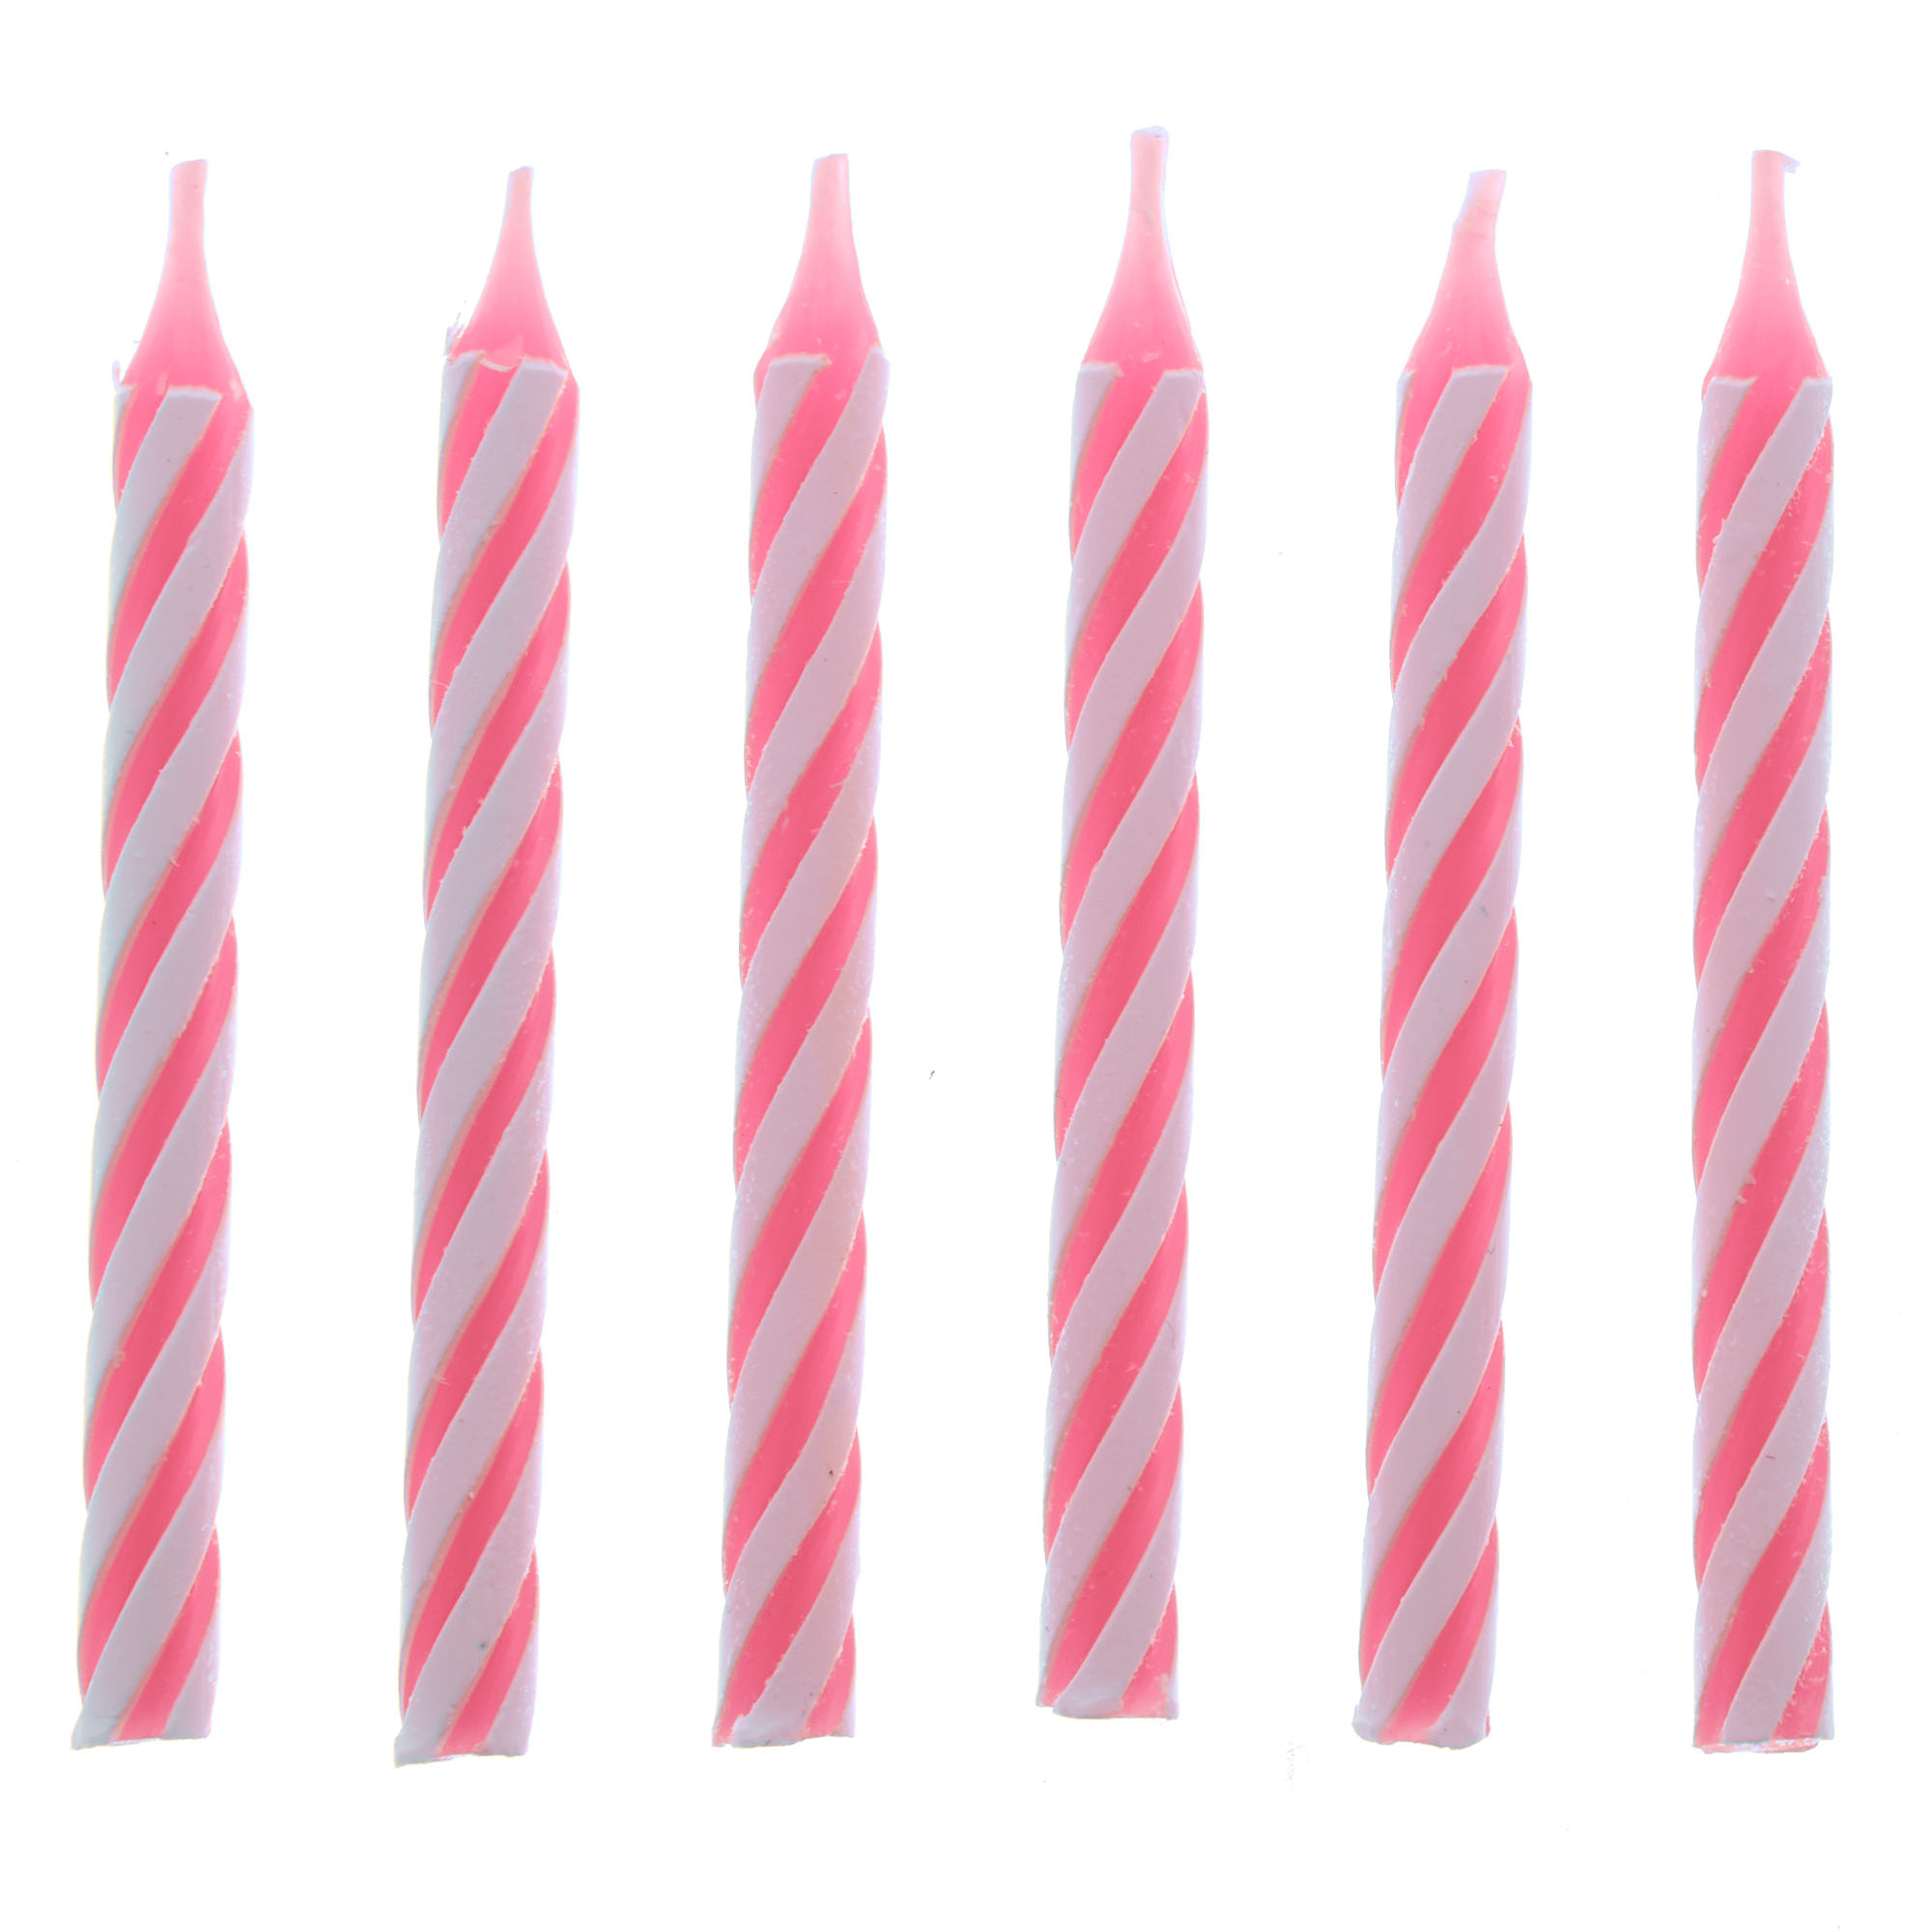 Pink Striped Birthday Candles - Pack of 24